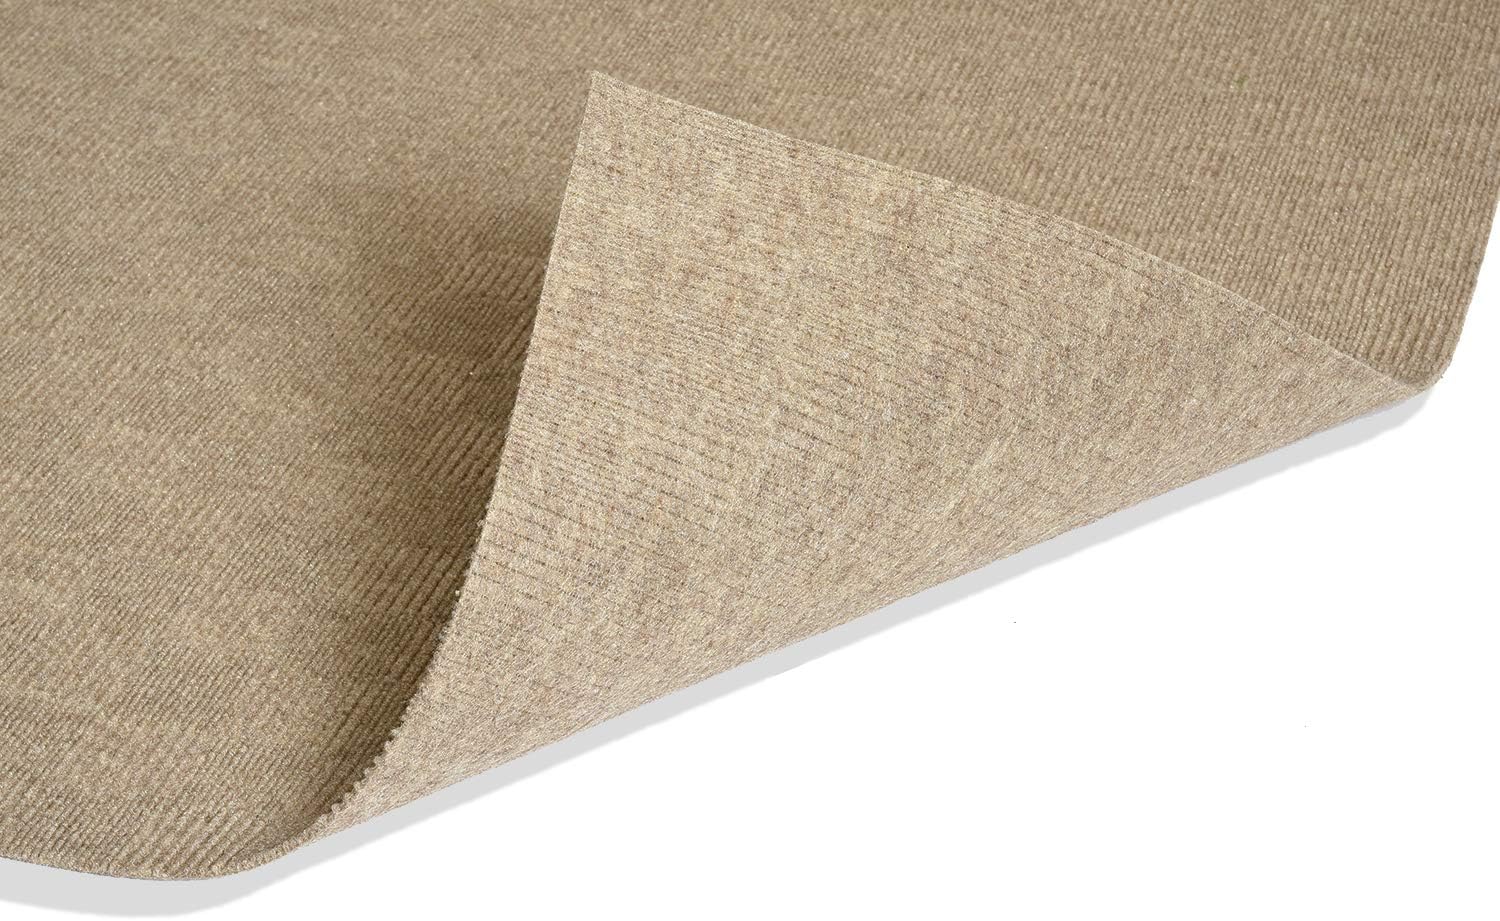 Koeckritz Rugs Soft and Durable Patchwork Style Indoor - Outdoor Area Rugs Lightweight and Flexible (Color: Taupe)